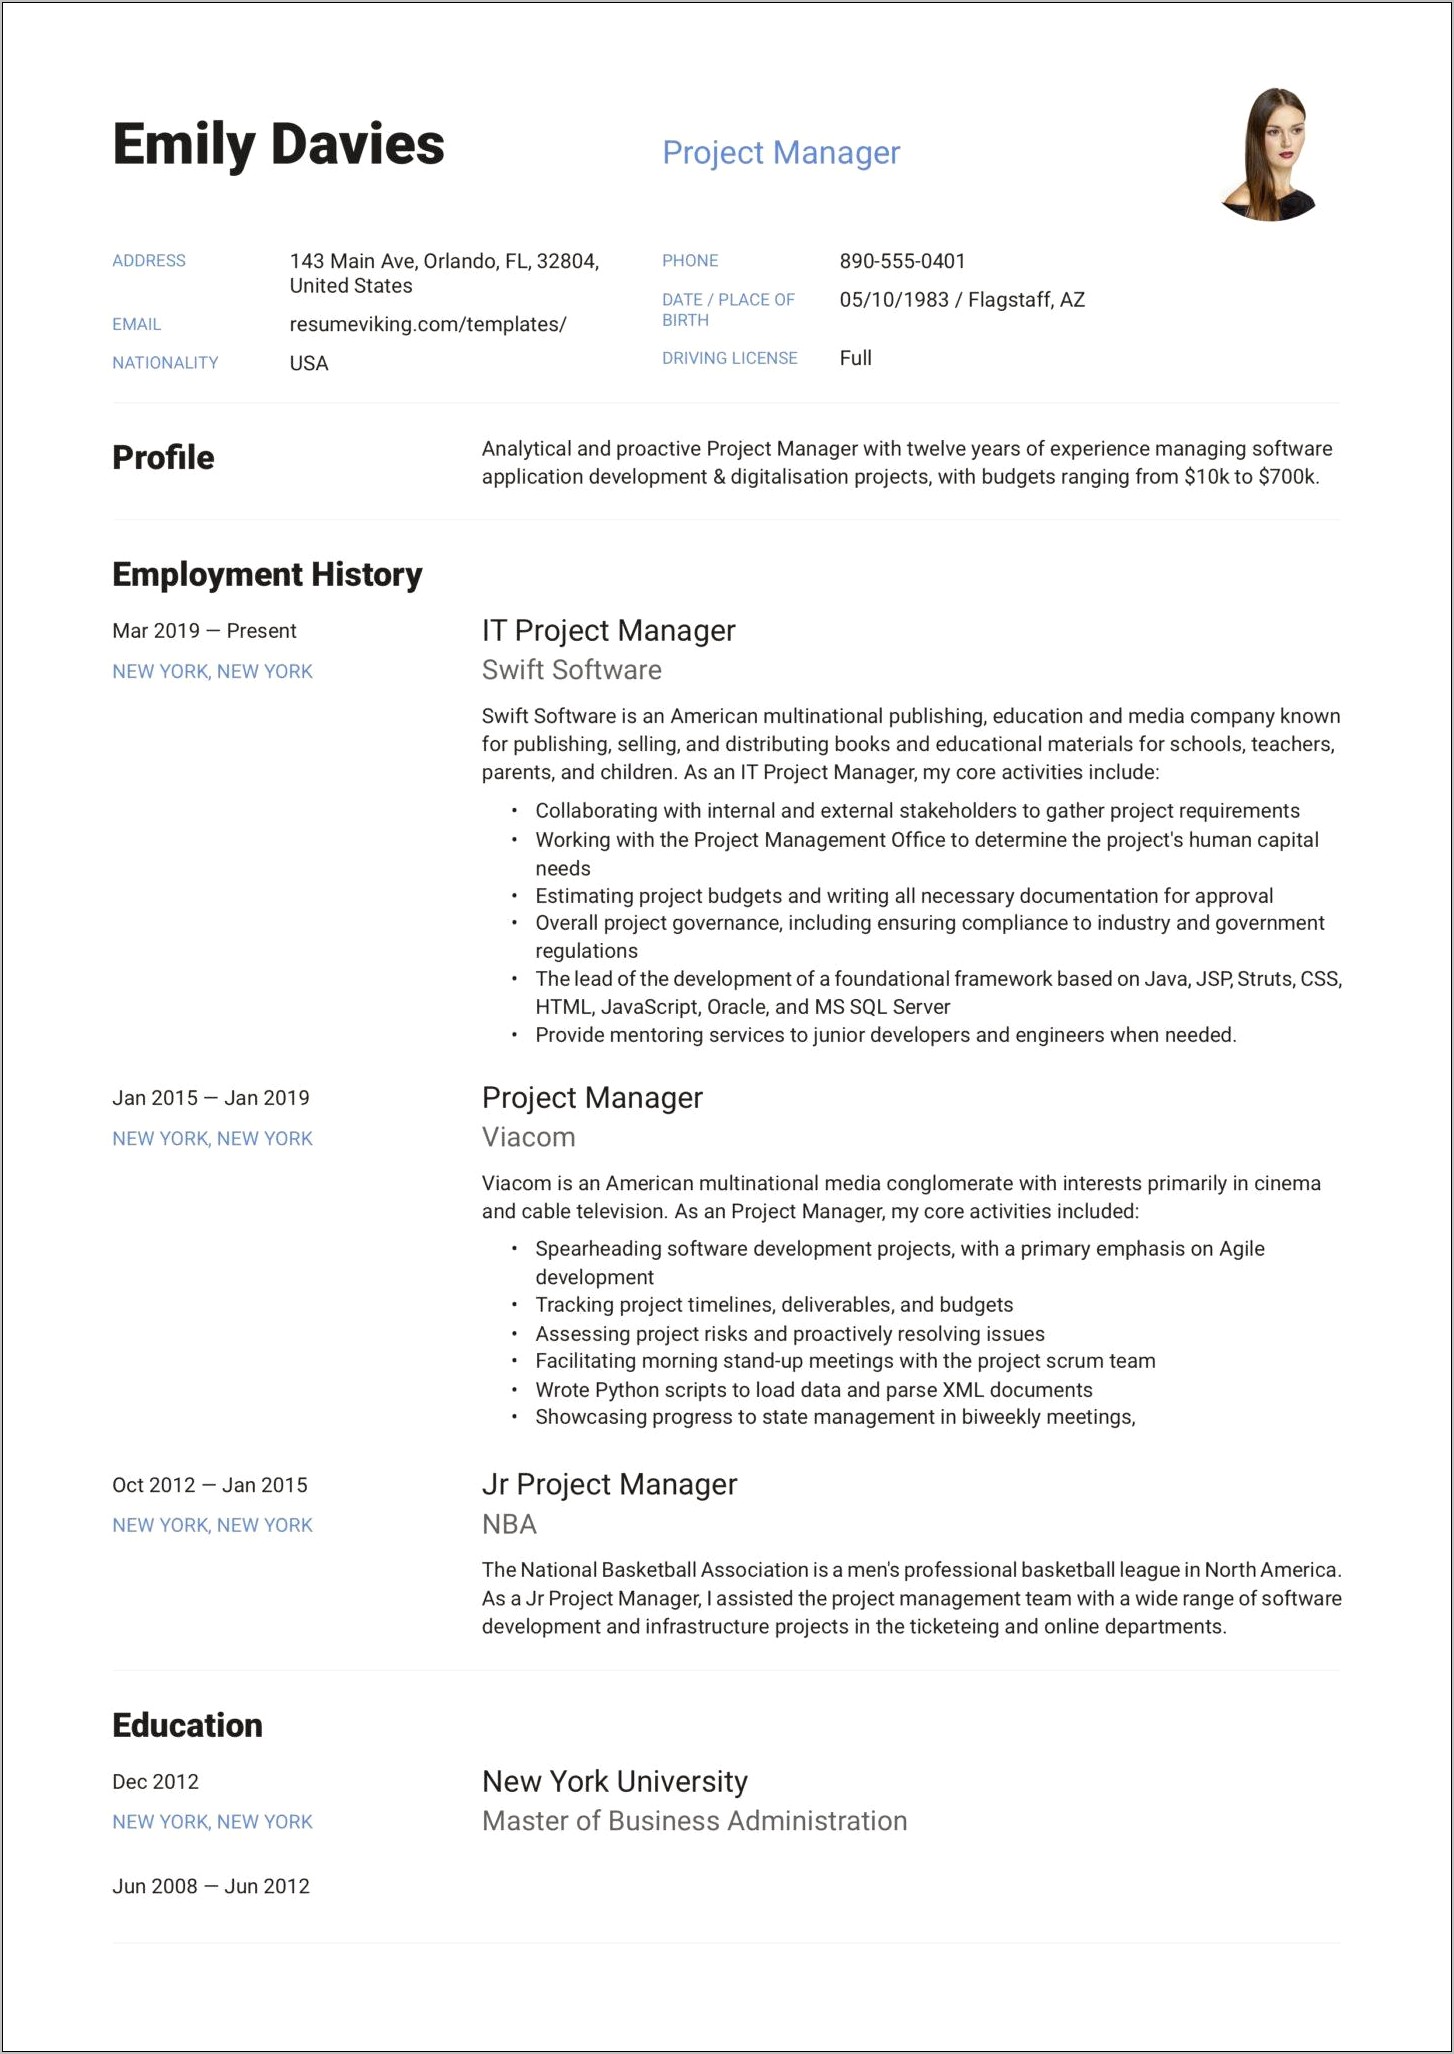 Resume Examples Project Manager Aerospace Forbes